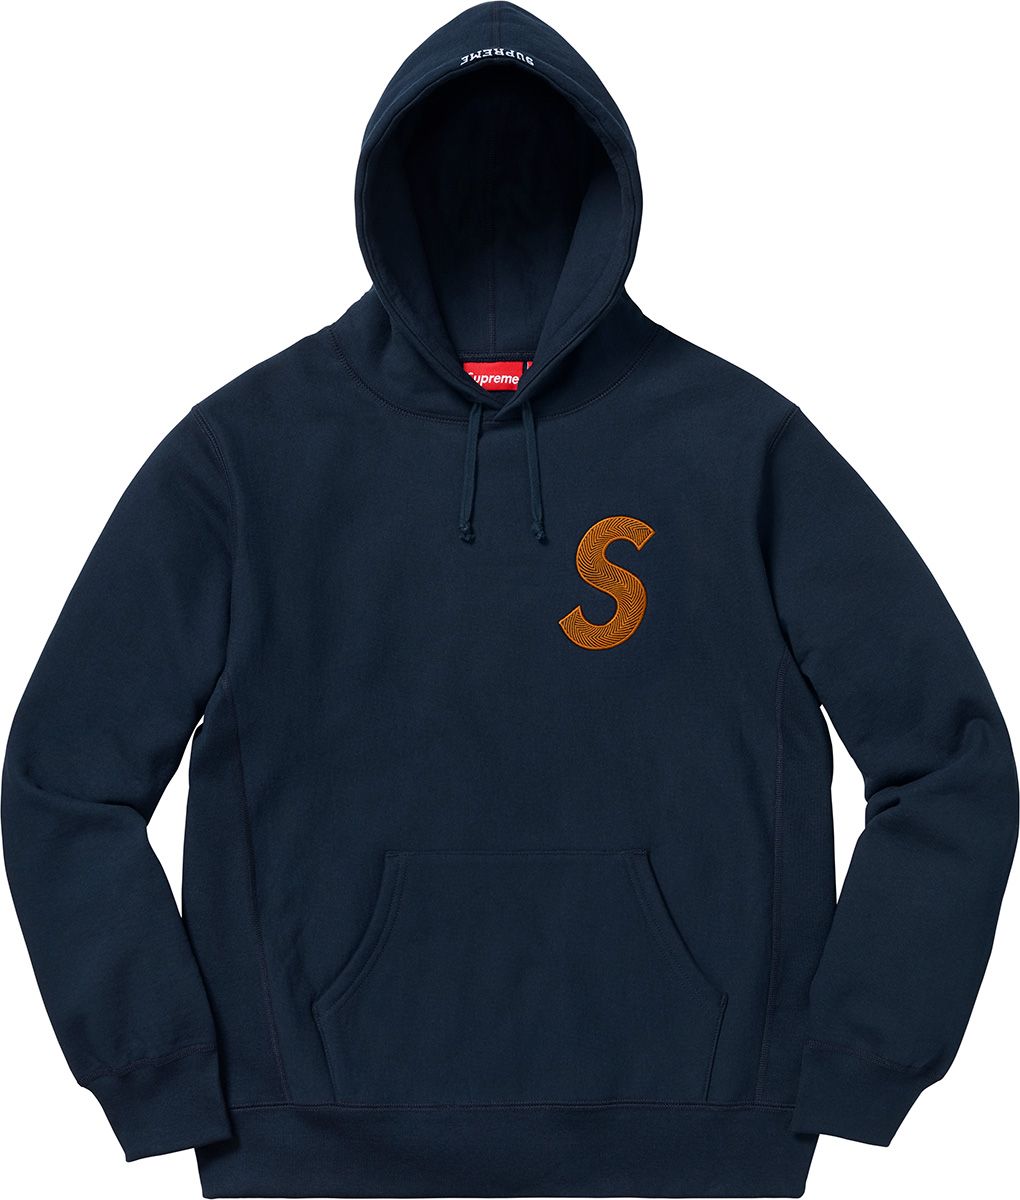 Chainstitch Hooded Sweatshirt - Fall/Winter 2018 Preview